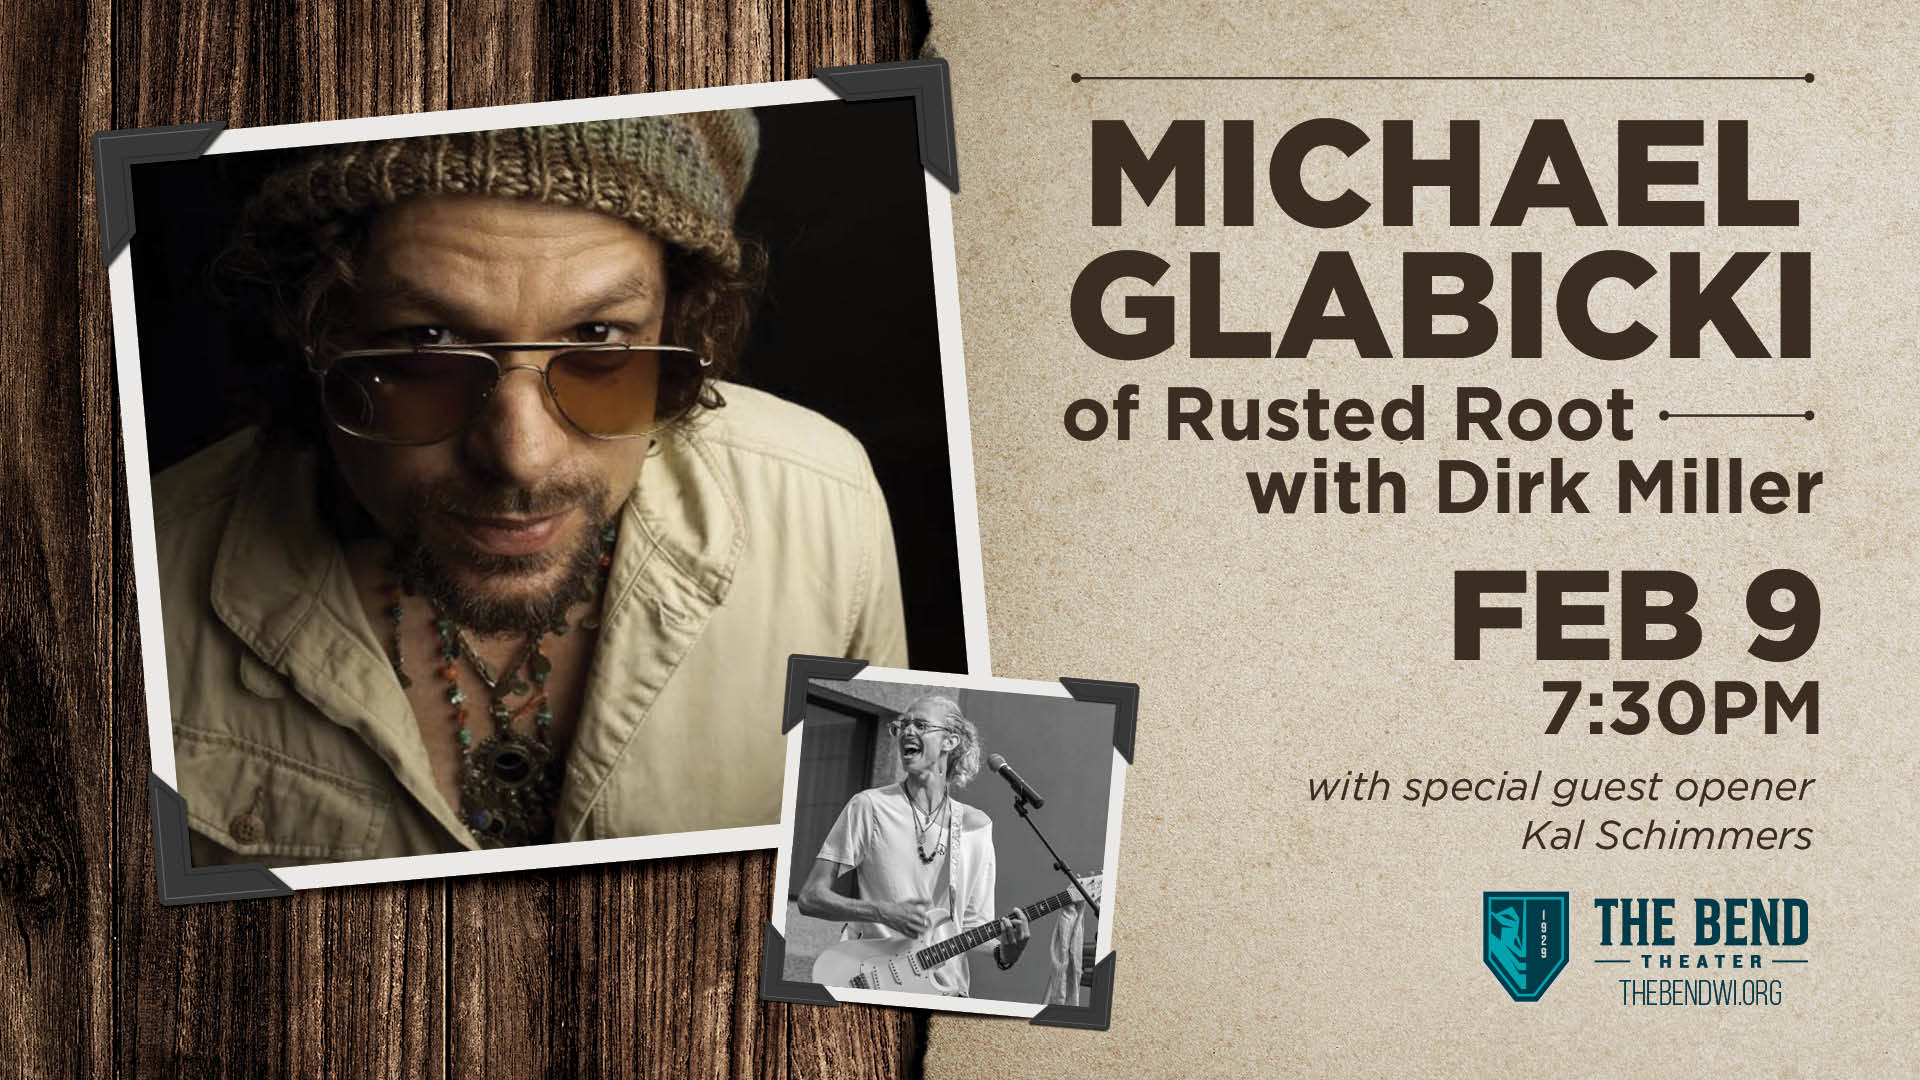 MICHAEL GLABICKI of Rusted Root with Dirk Miller + special guest opener Kal Schimmers